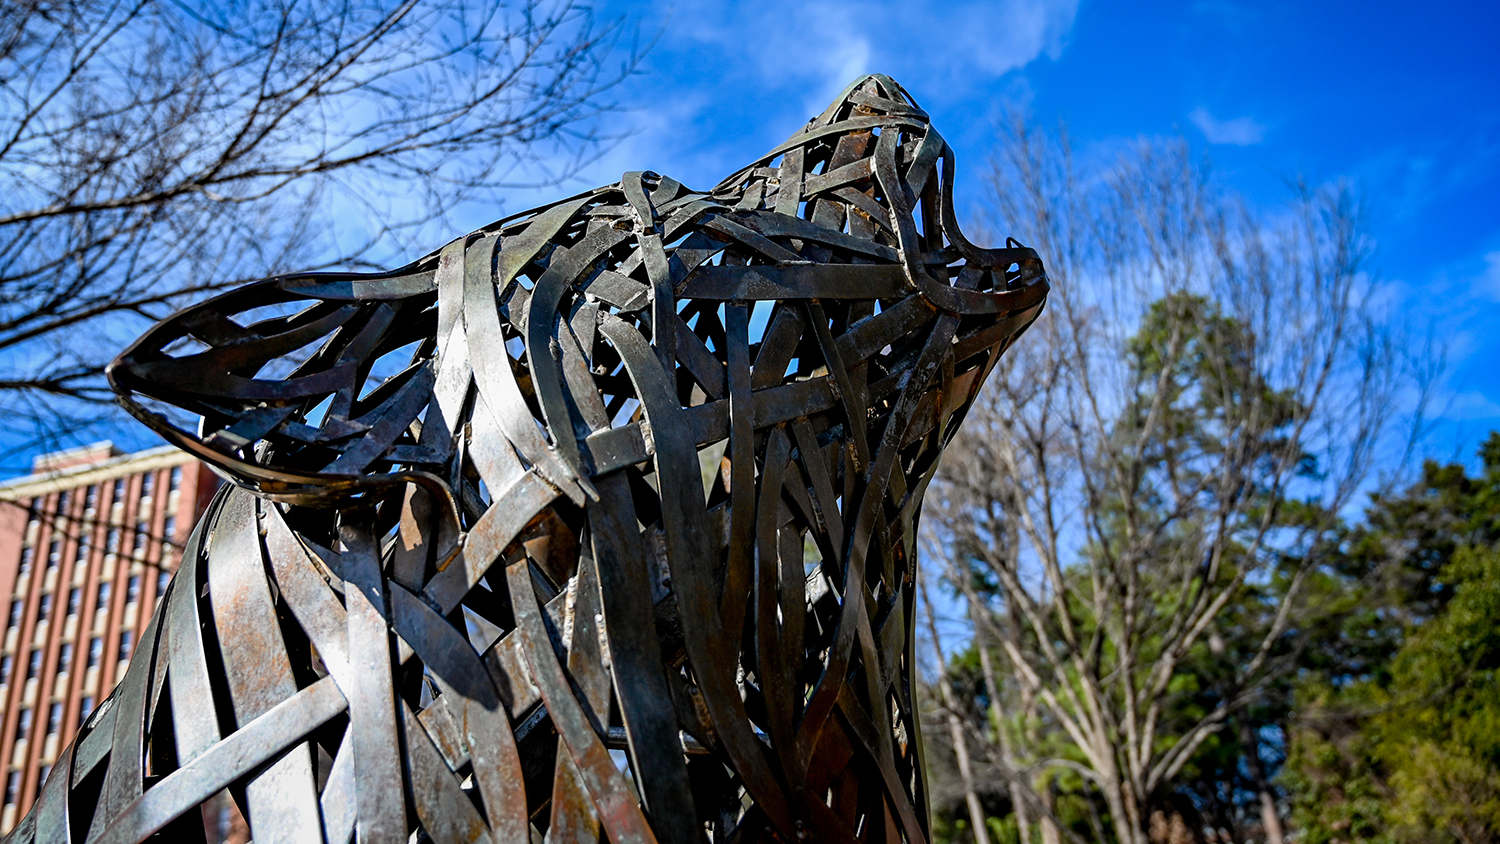 Howling wolf sculpture silhouetted by blue sky.